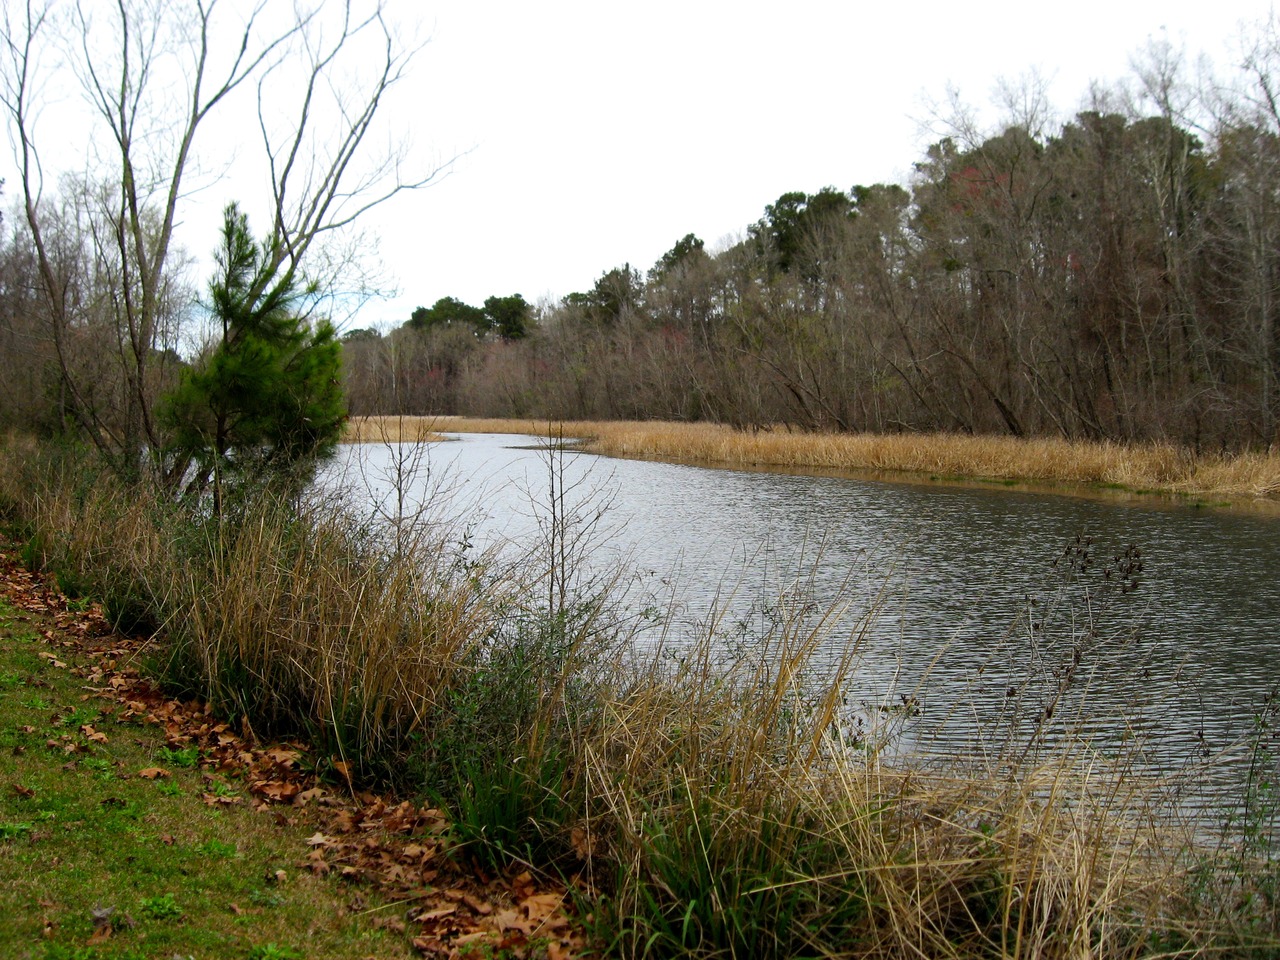 Part of the Chattahoochee River along the shore at Parramore Landing Park.